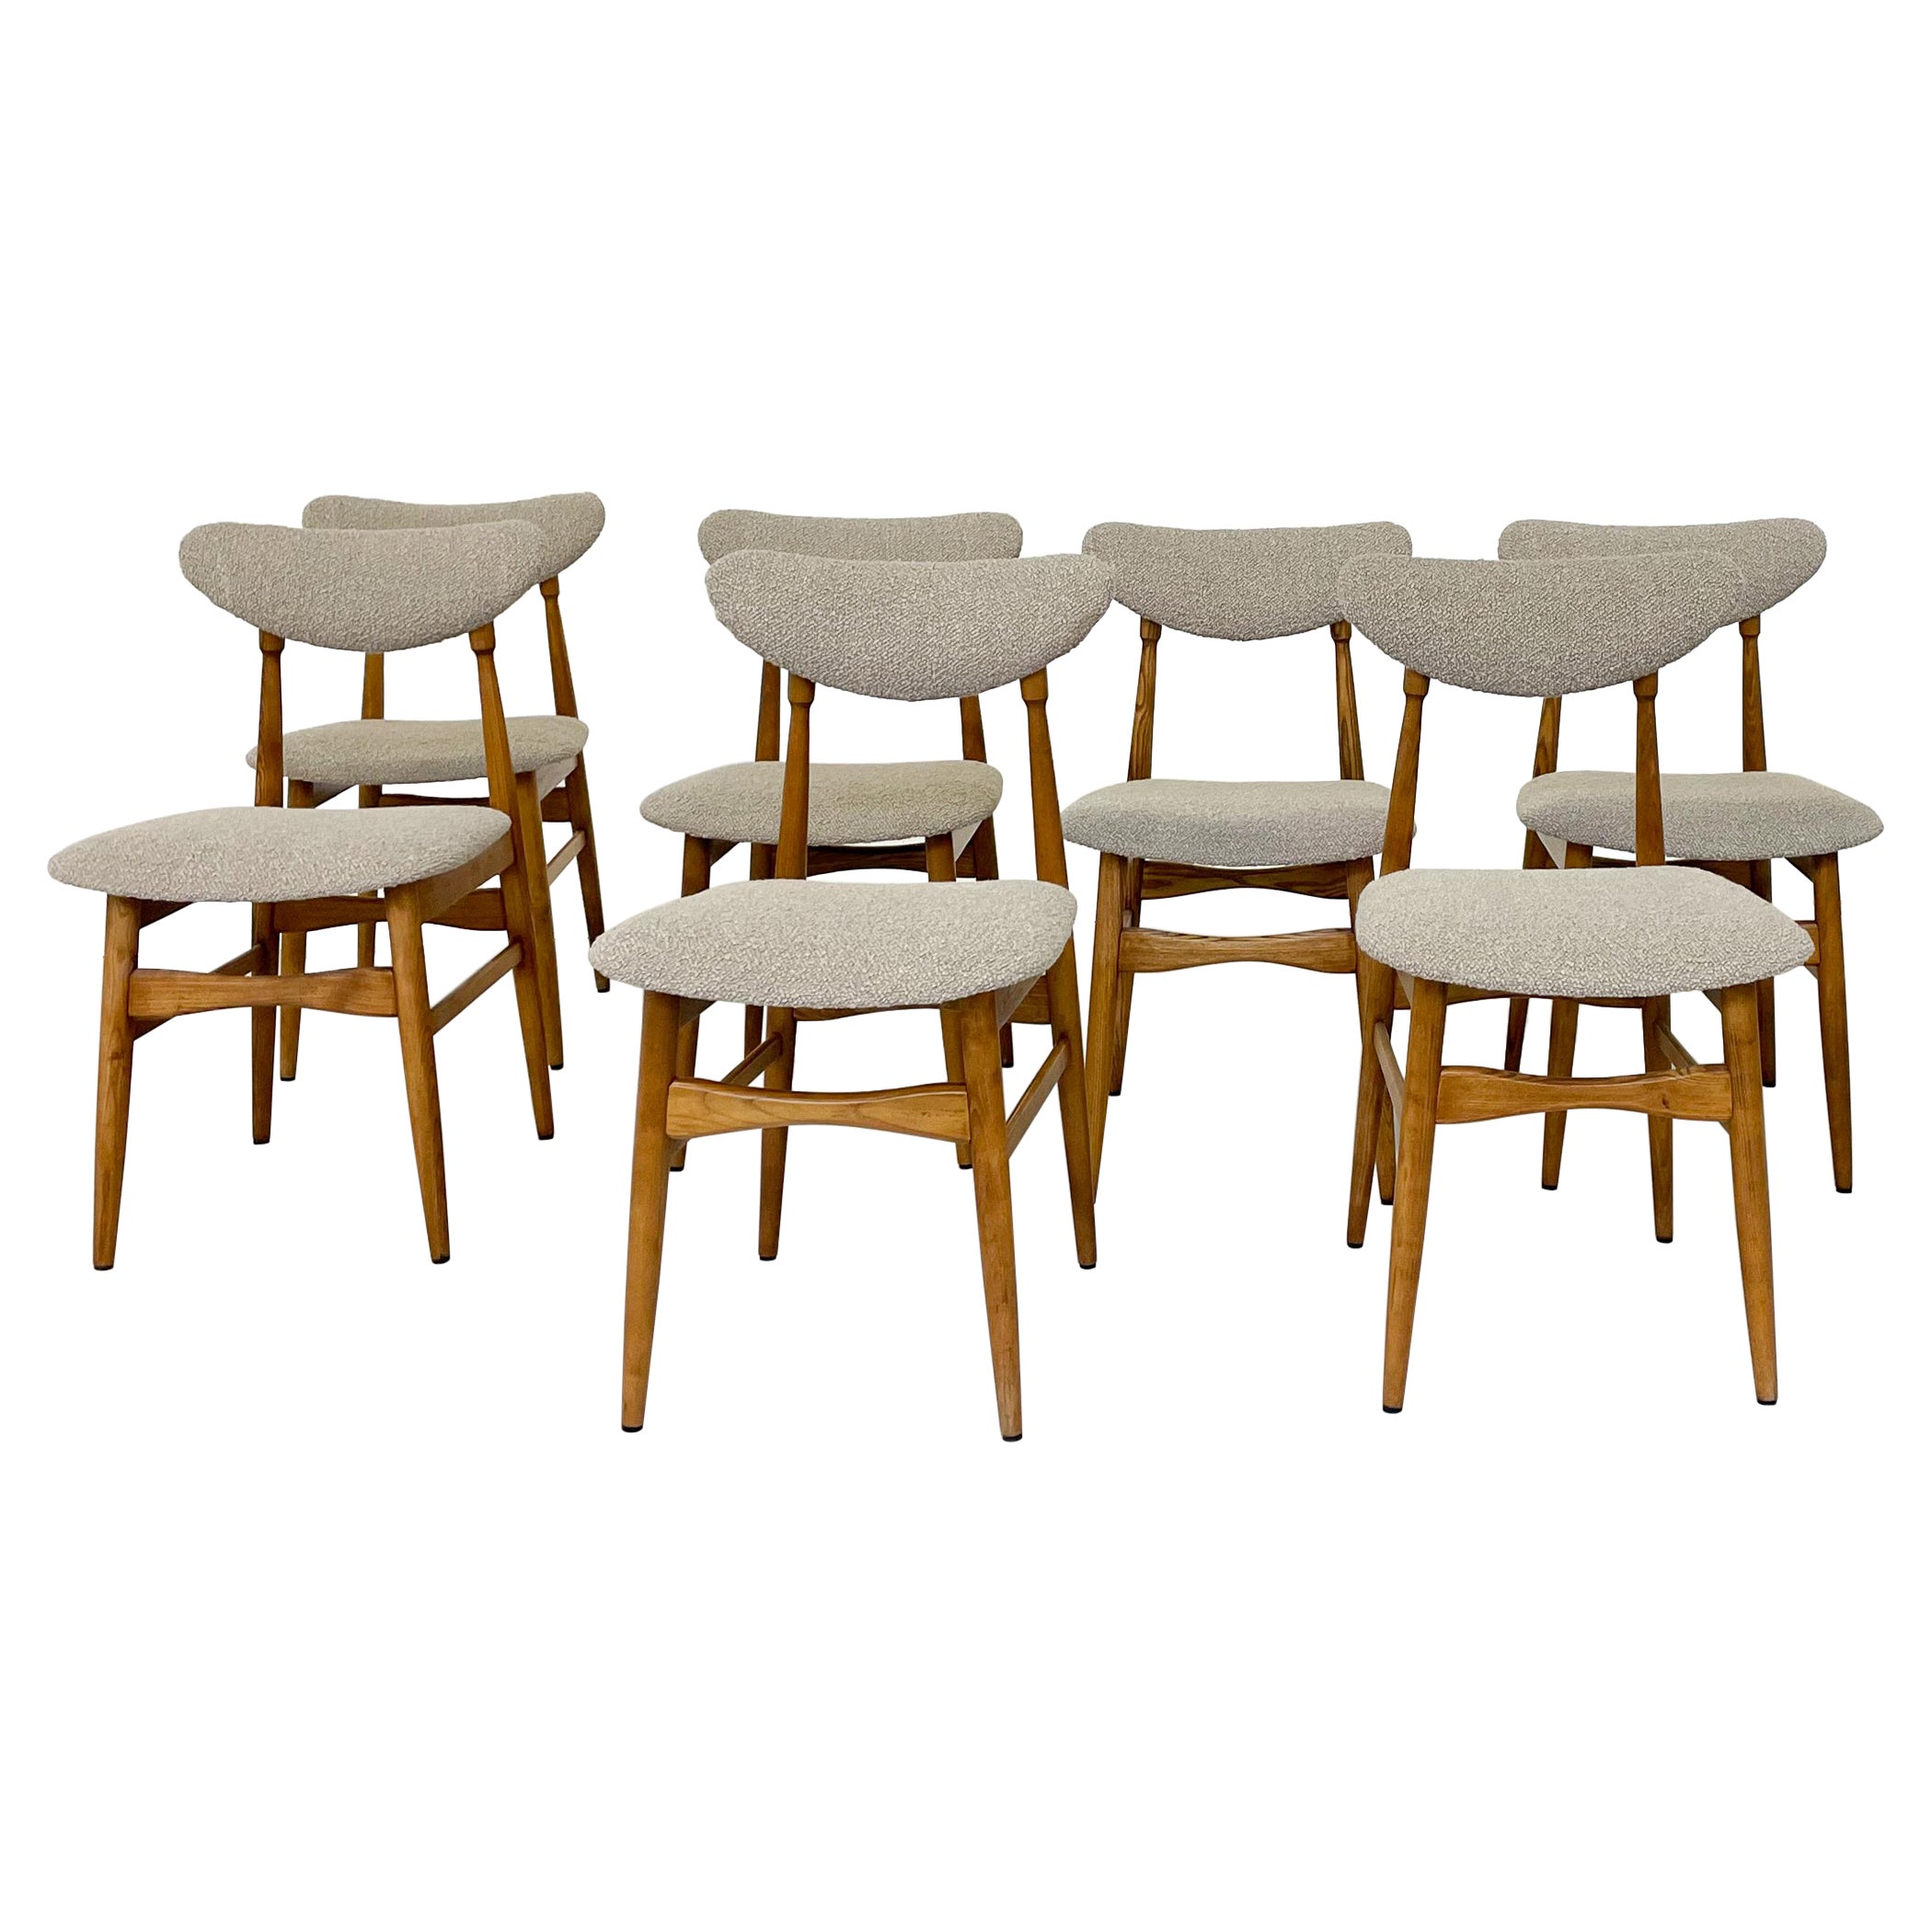 Mid-Century Modern Set of 12 Chairs, Italy, 1960s - New Upholstery For Sale